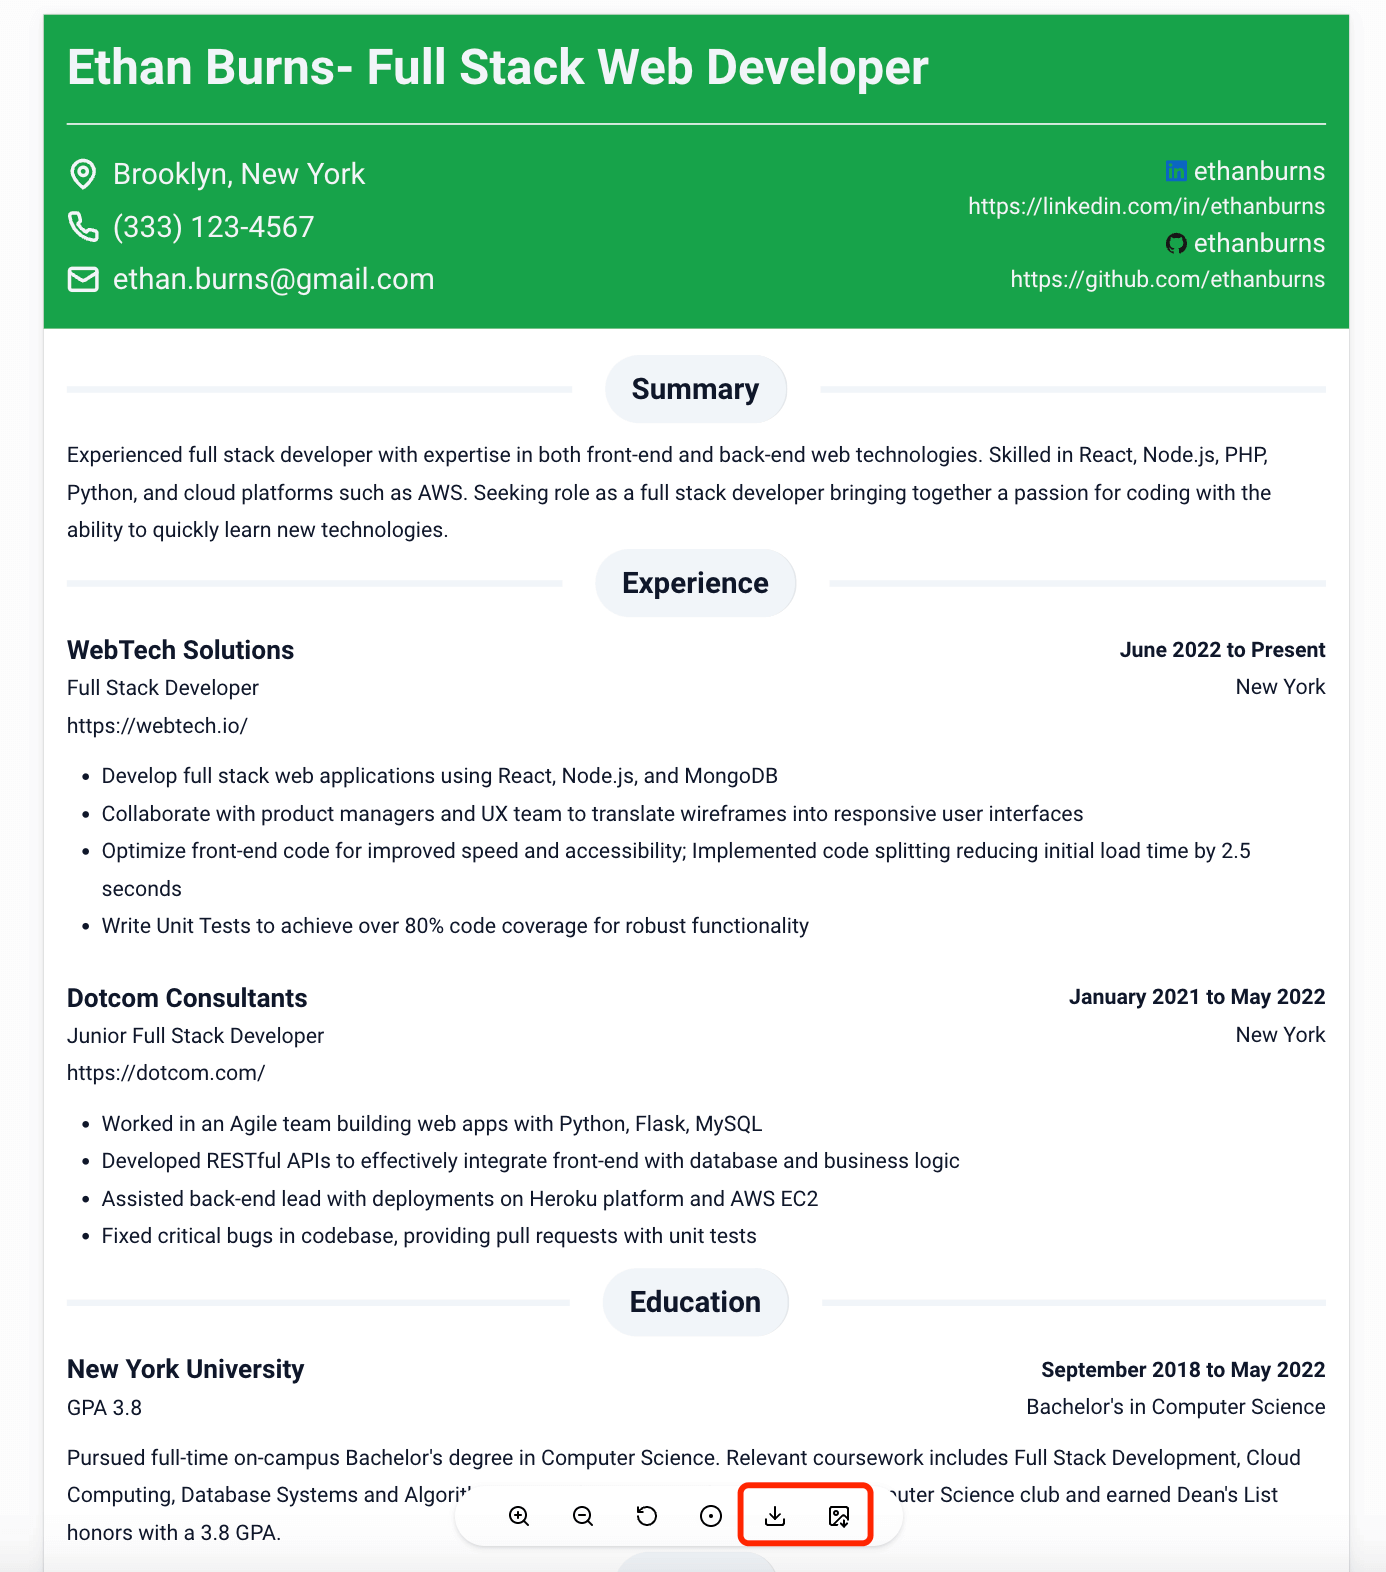 donwload or export resume